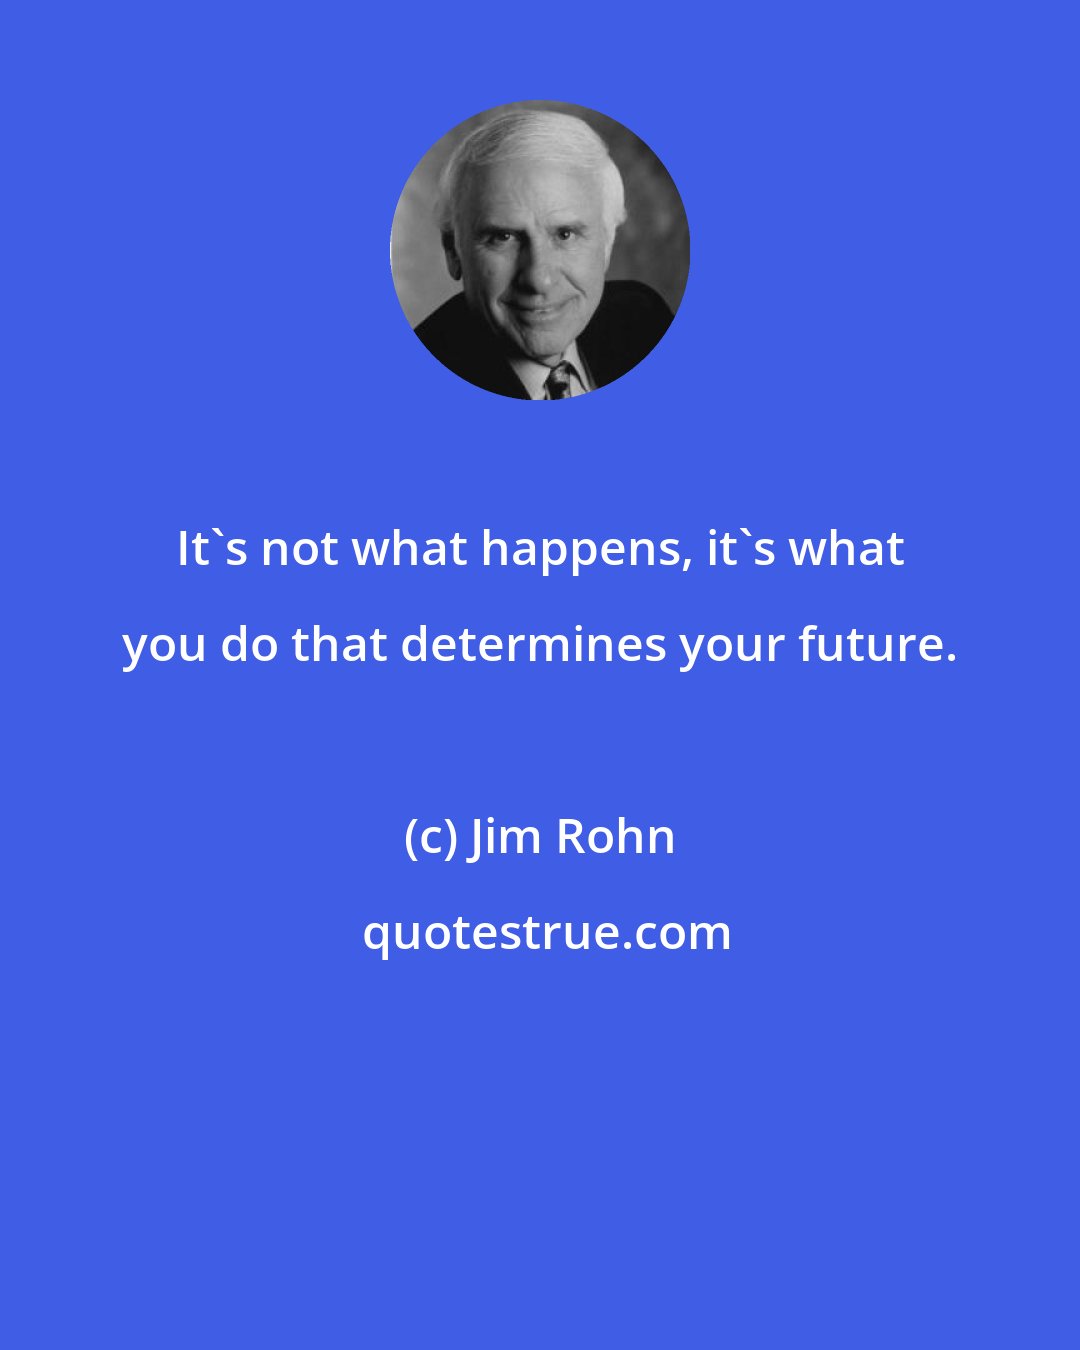 Jim Rohn: It's not what happens, it's what you do that determines your future.